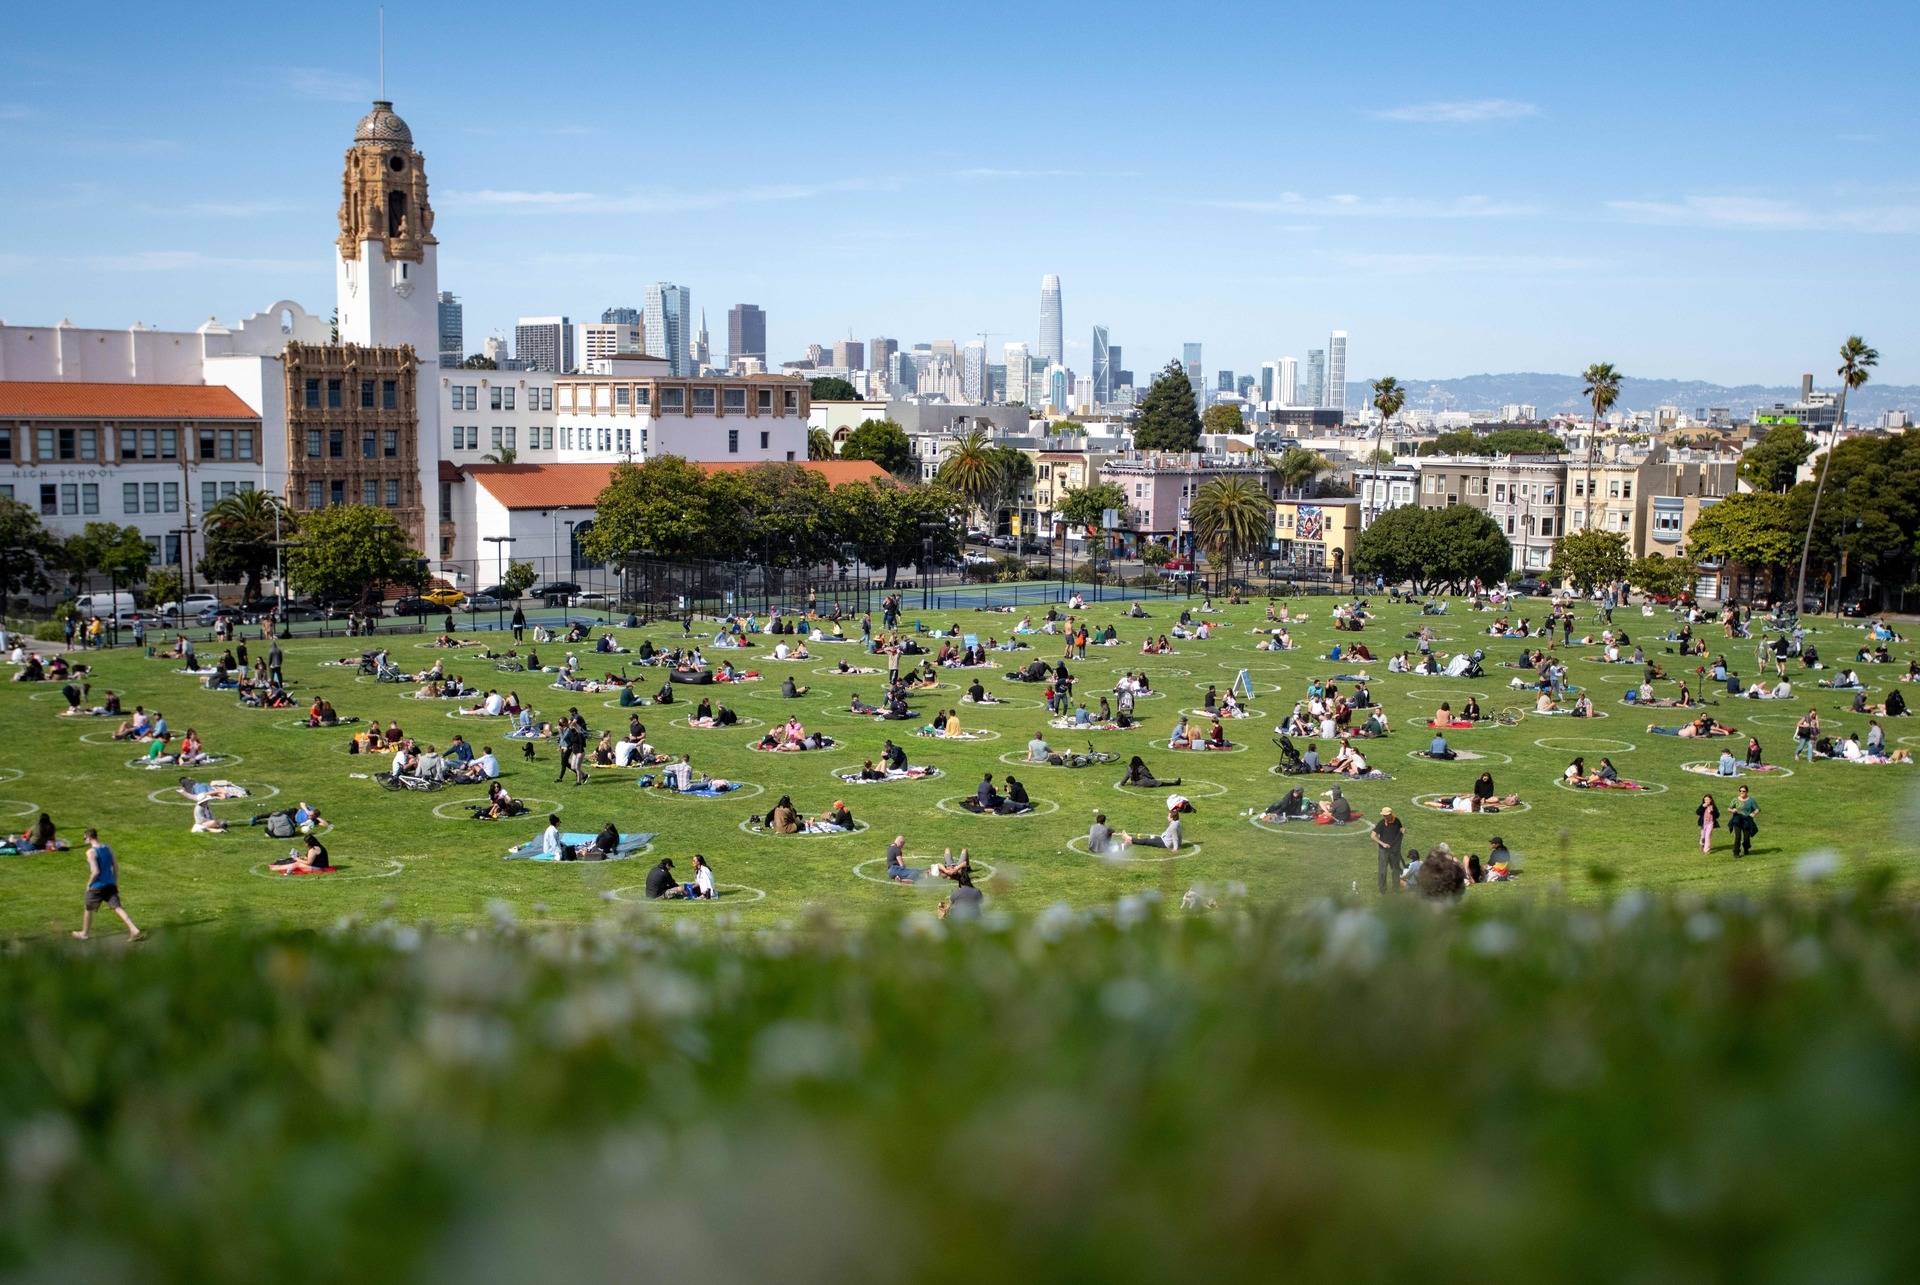 People gather inside painted circles on the grass meant to encourage social distancing at Dolores Park in San Francisco on May 22, 2020. Josh Edelson/AFP via Getty Images